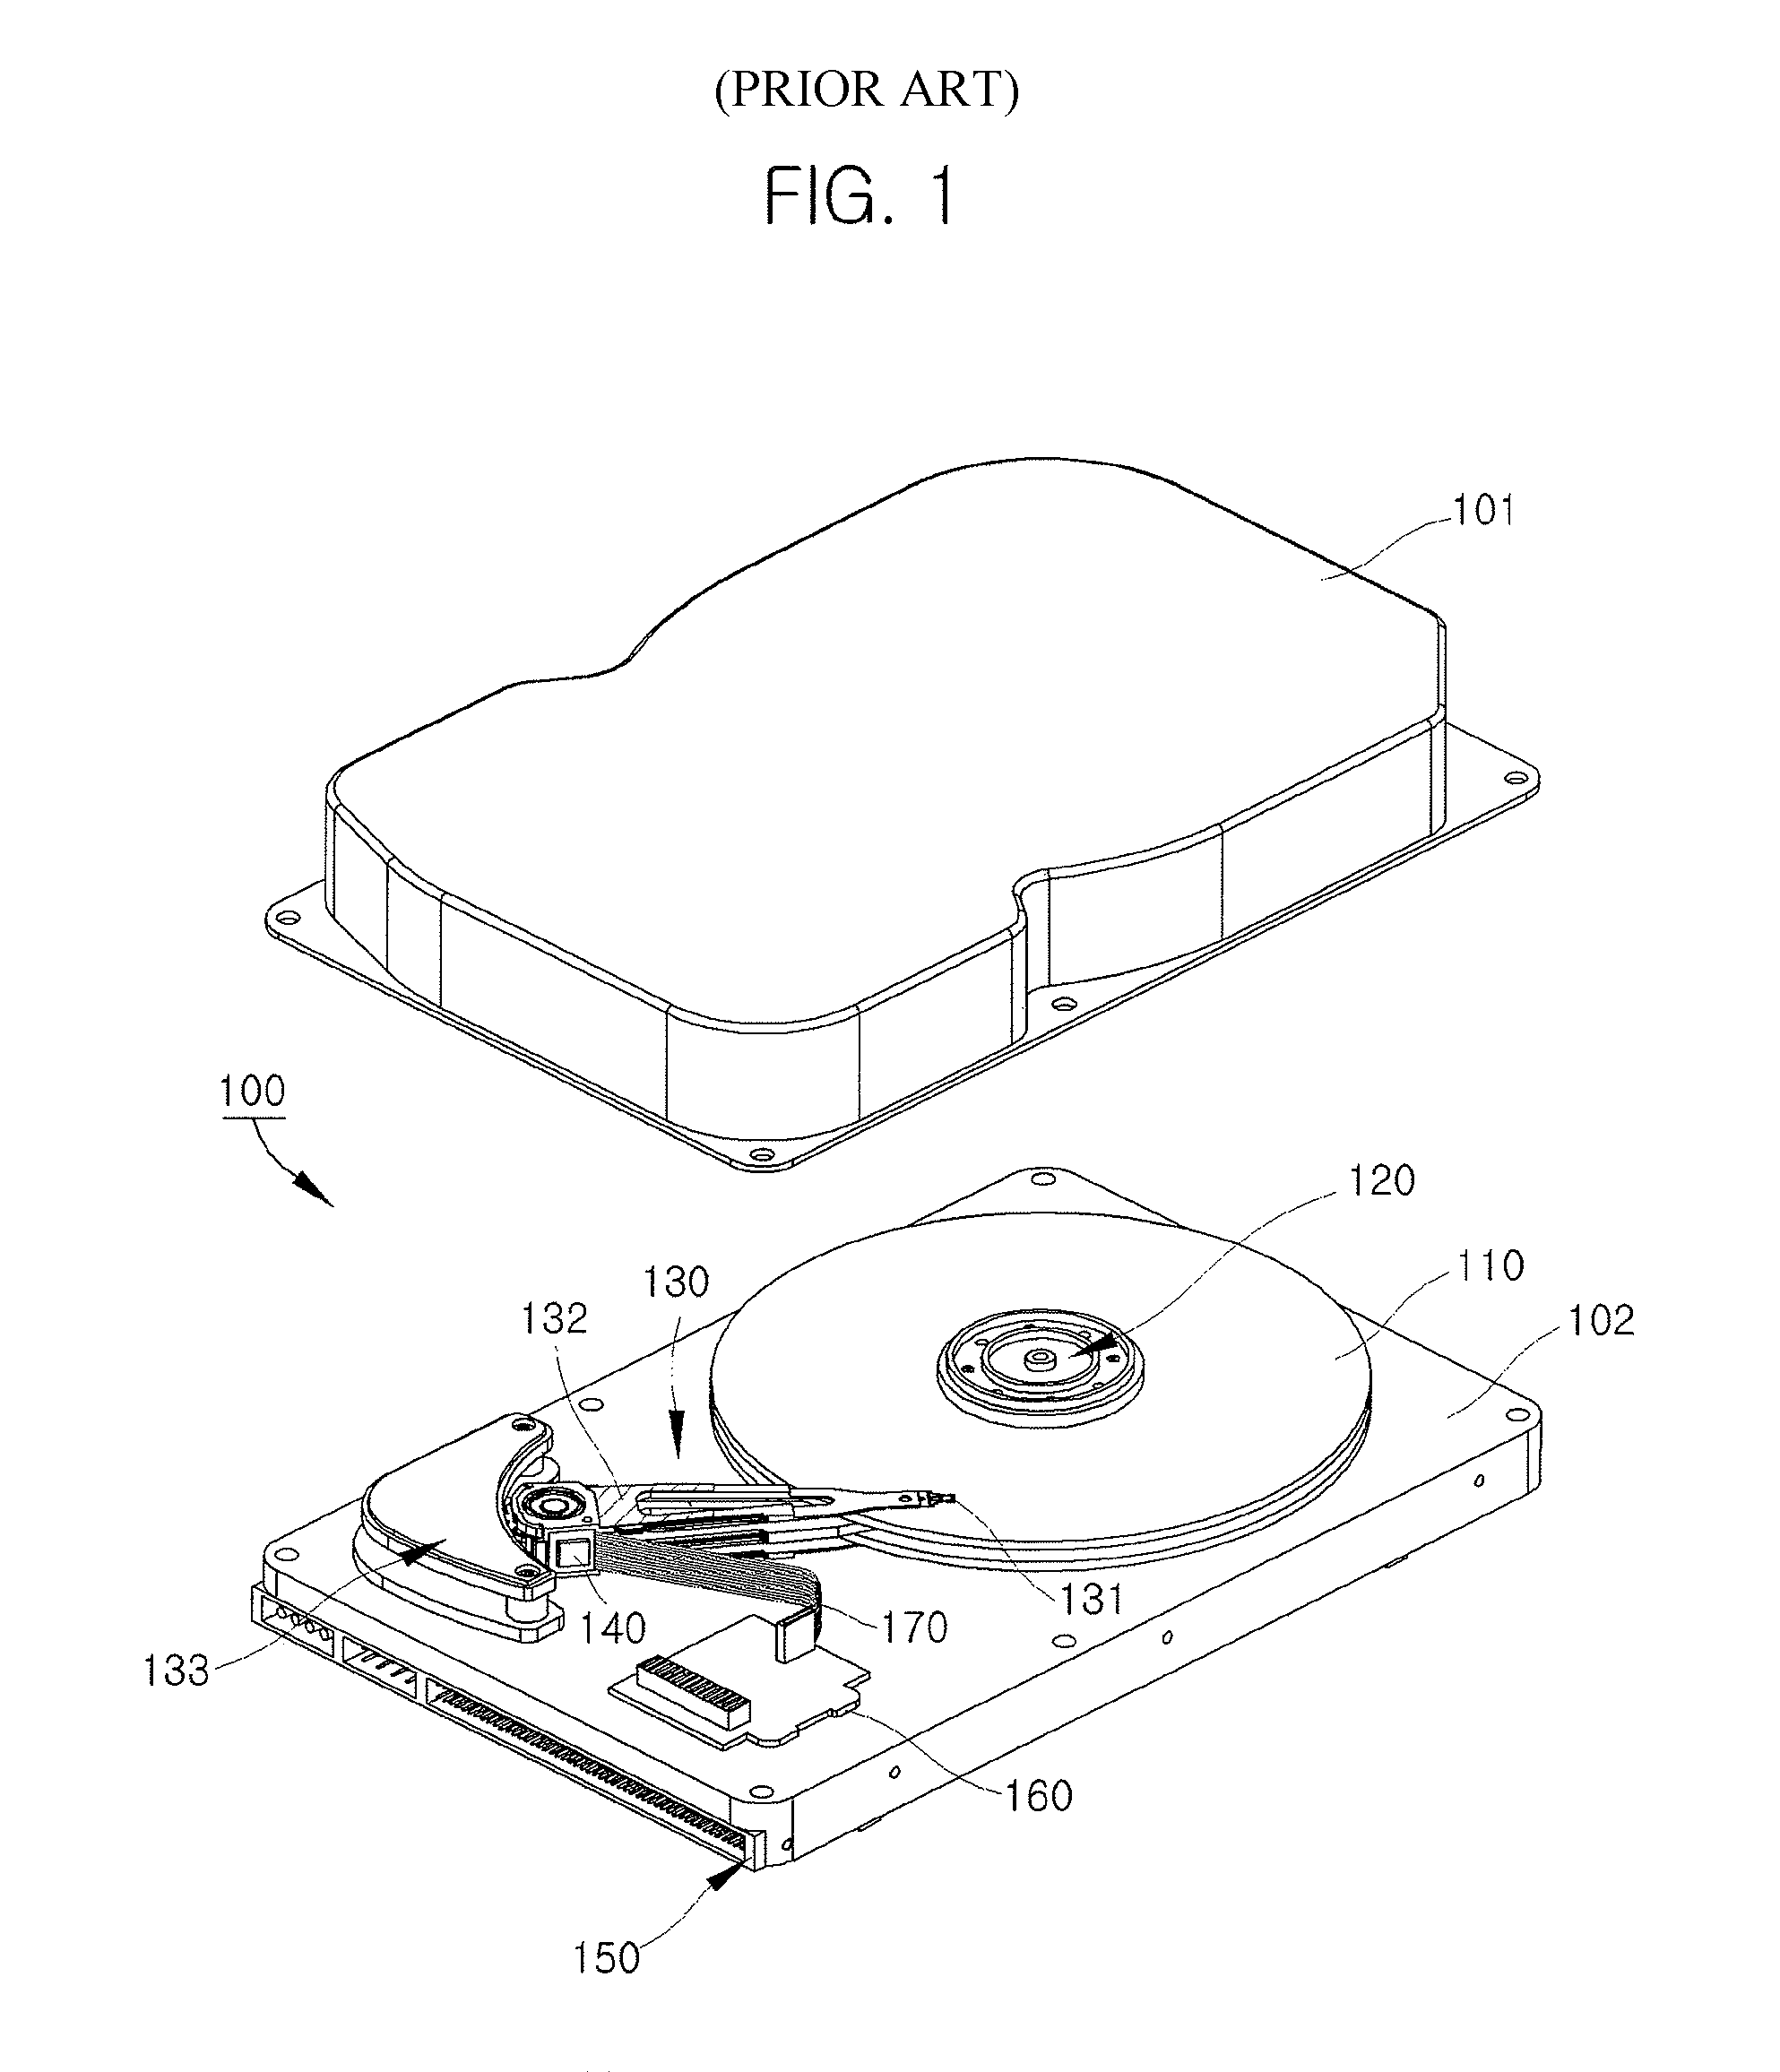 Hard disk drive apparatus having a flexible printed circuit with a plurality of traces in a specified order